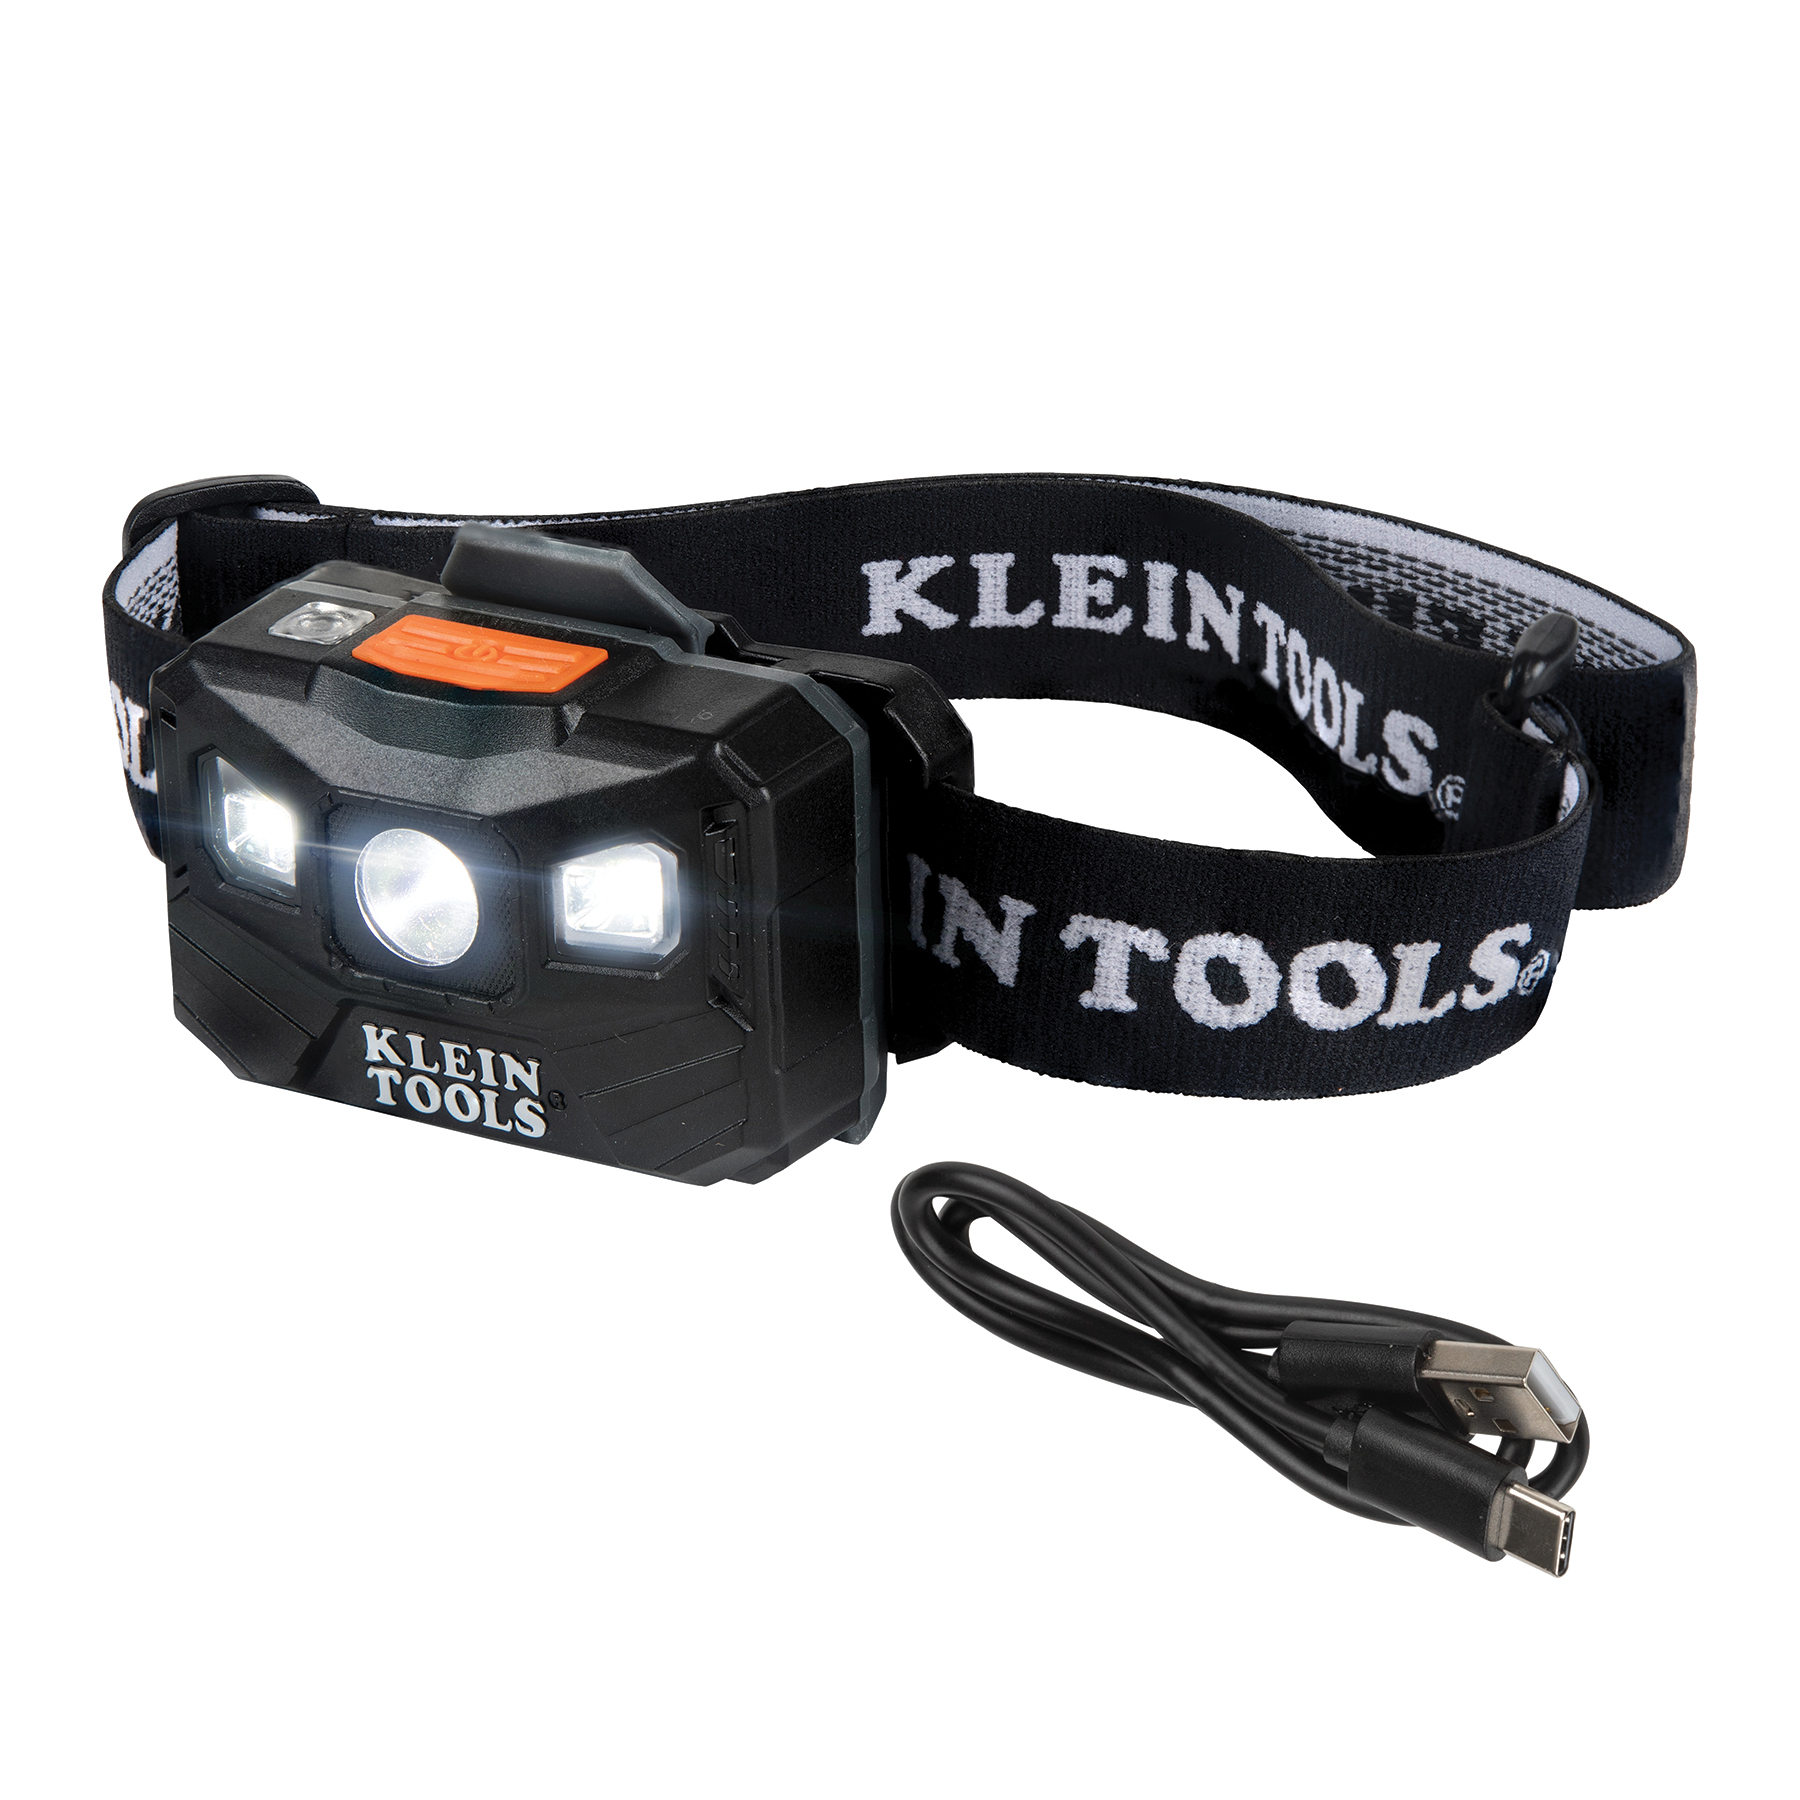 RECHARGEABLE HEADLAMP 400 LUMENS ALL DAY RUNTIME